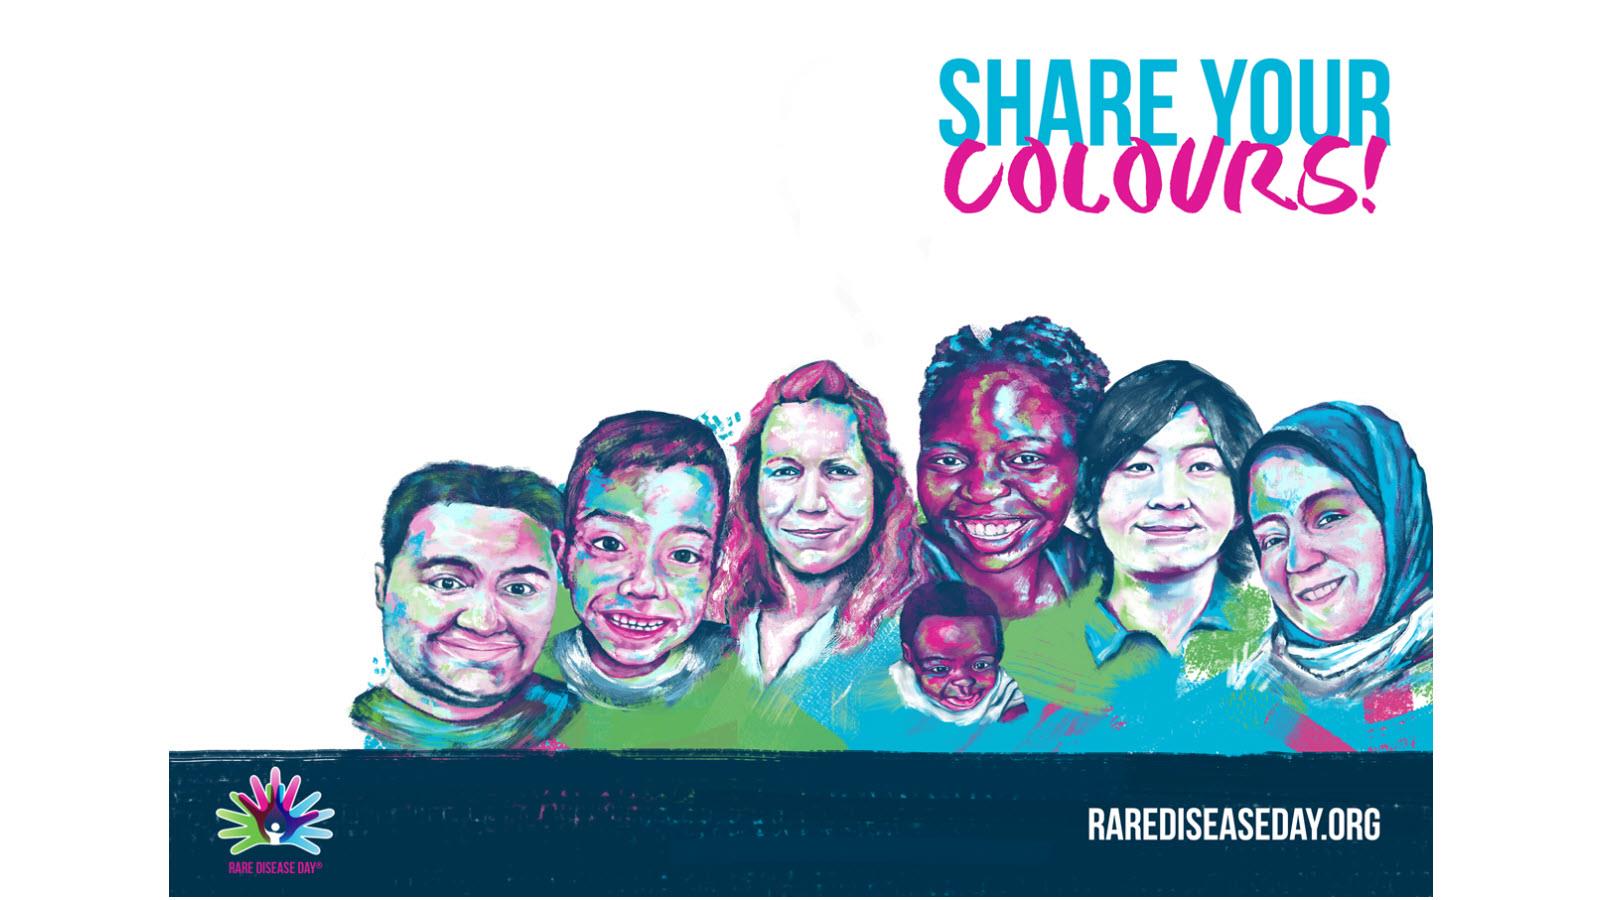 Seven patients in the blue, green, purple and pink colors of Rare Disease Day with the text "Share Your Colours!"